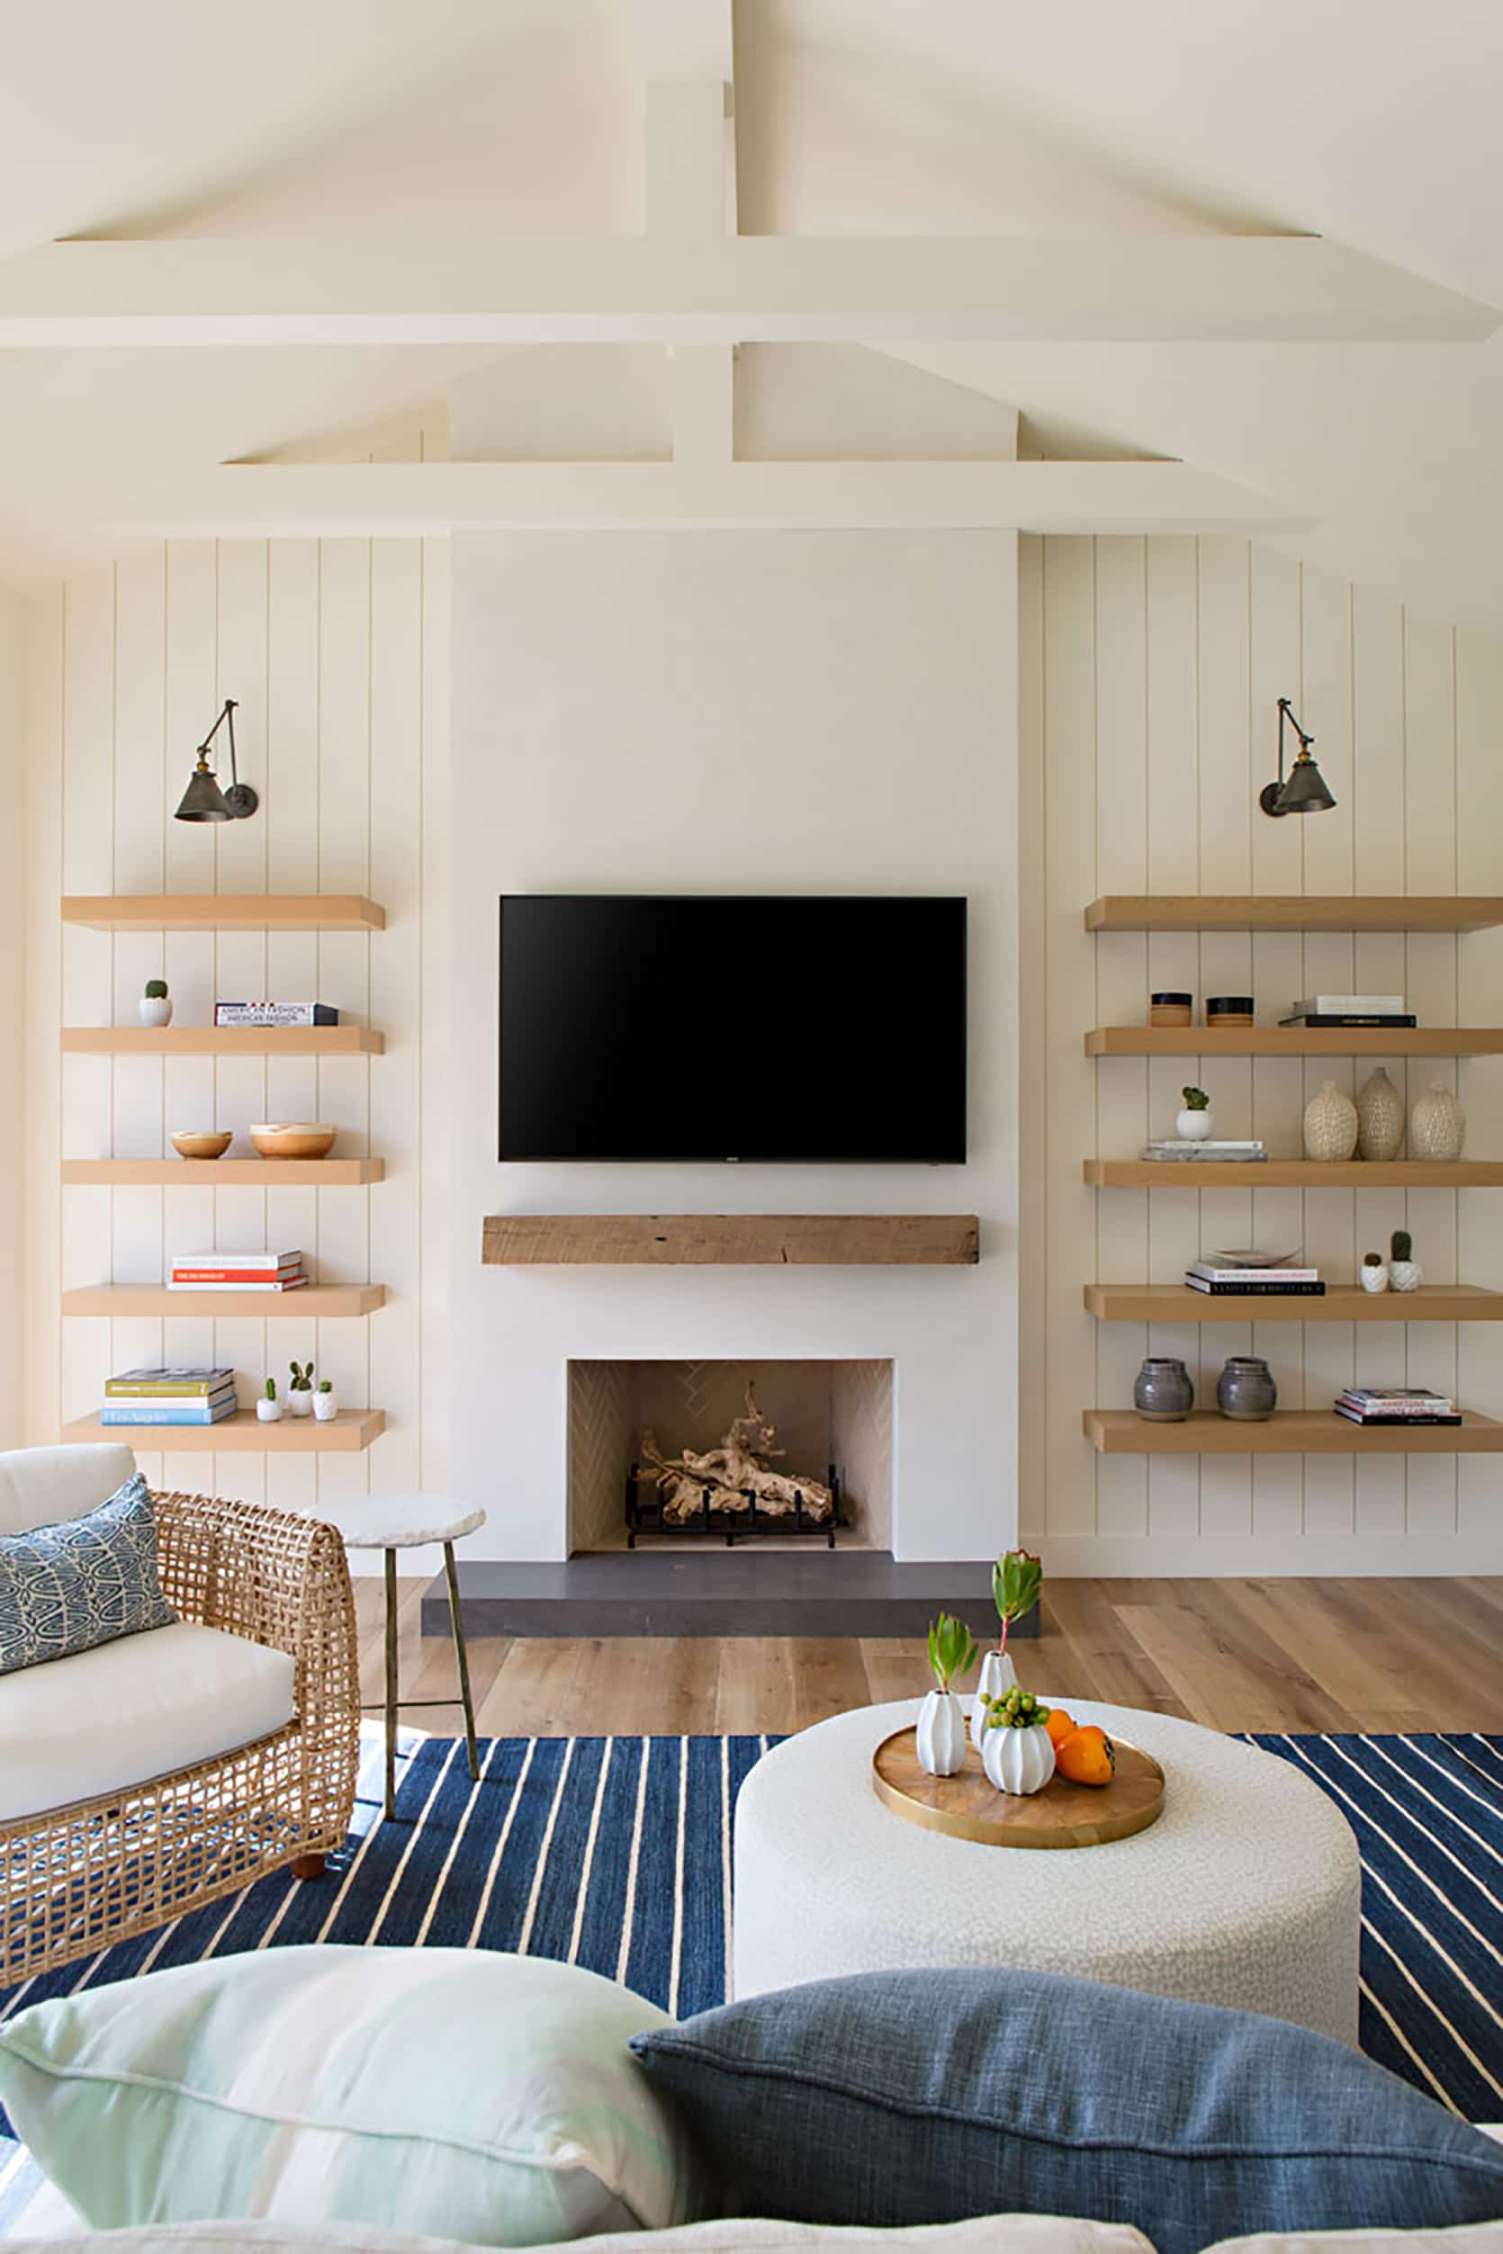 Where To Put Your TV And Fireplace:  Winning Formulas That